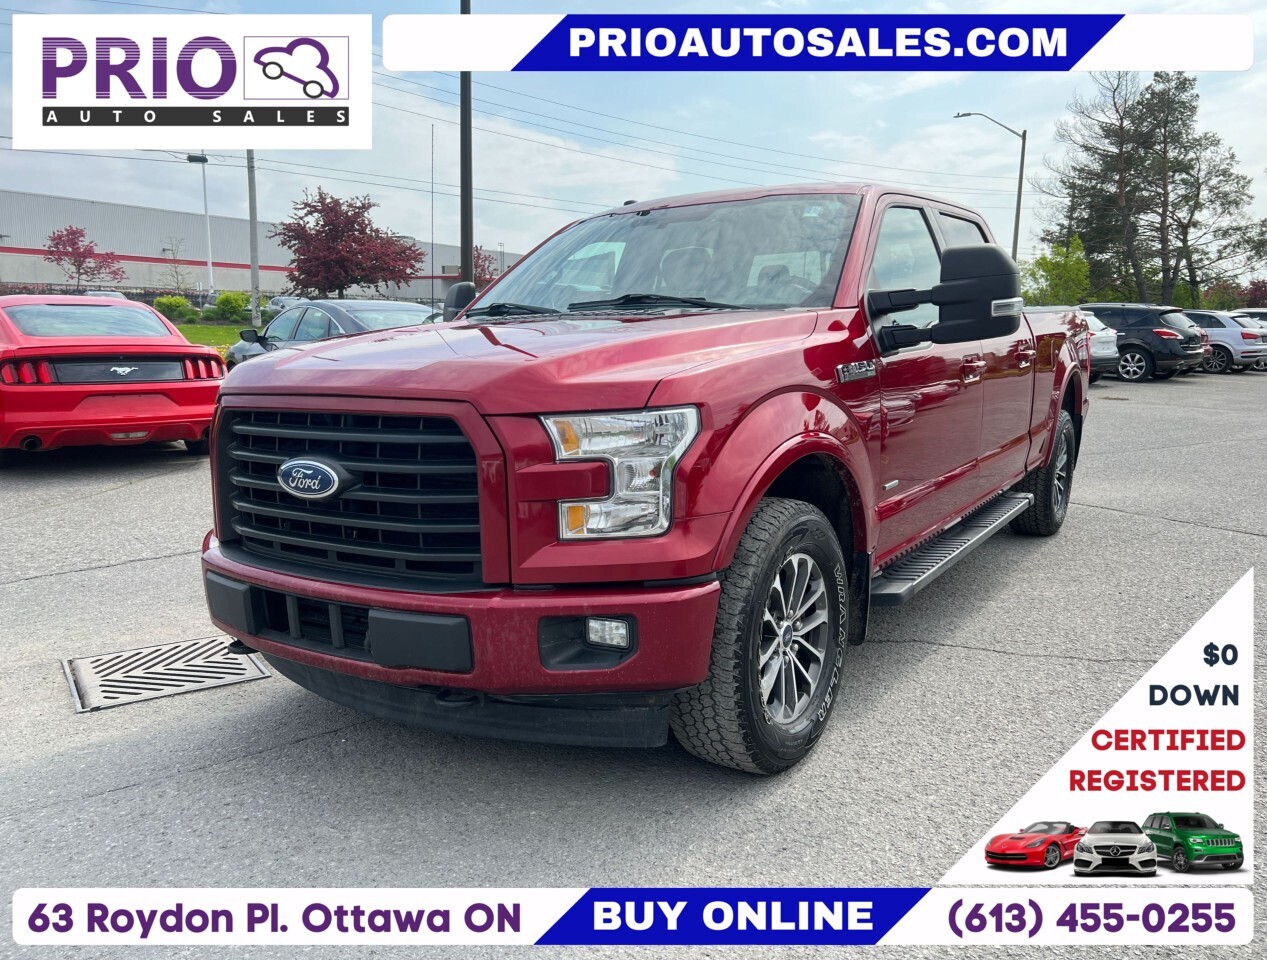 2017 Ford F-150 4WD SuperCrew Styleside 5-1/2 Ft Box XLT